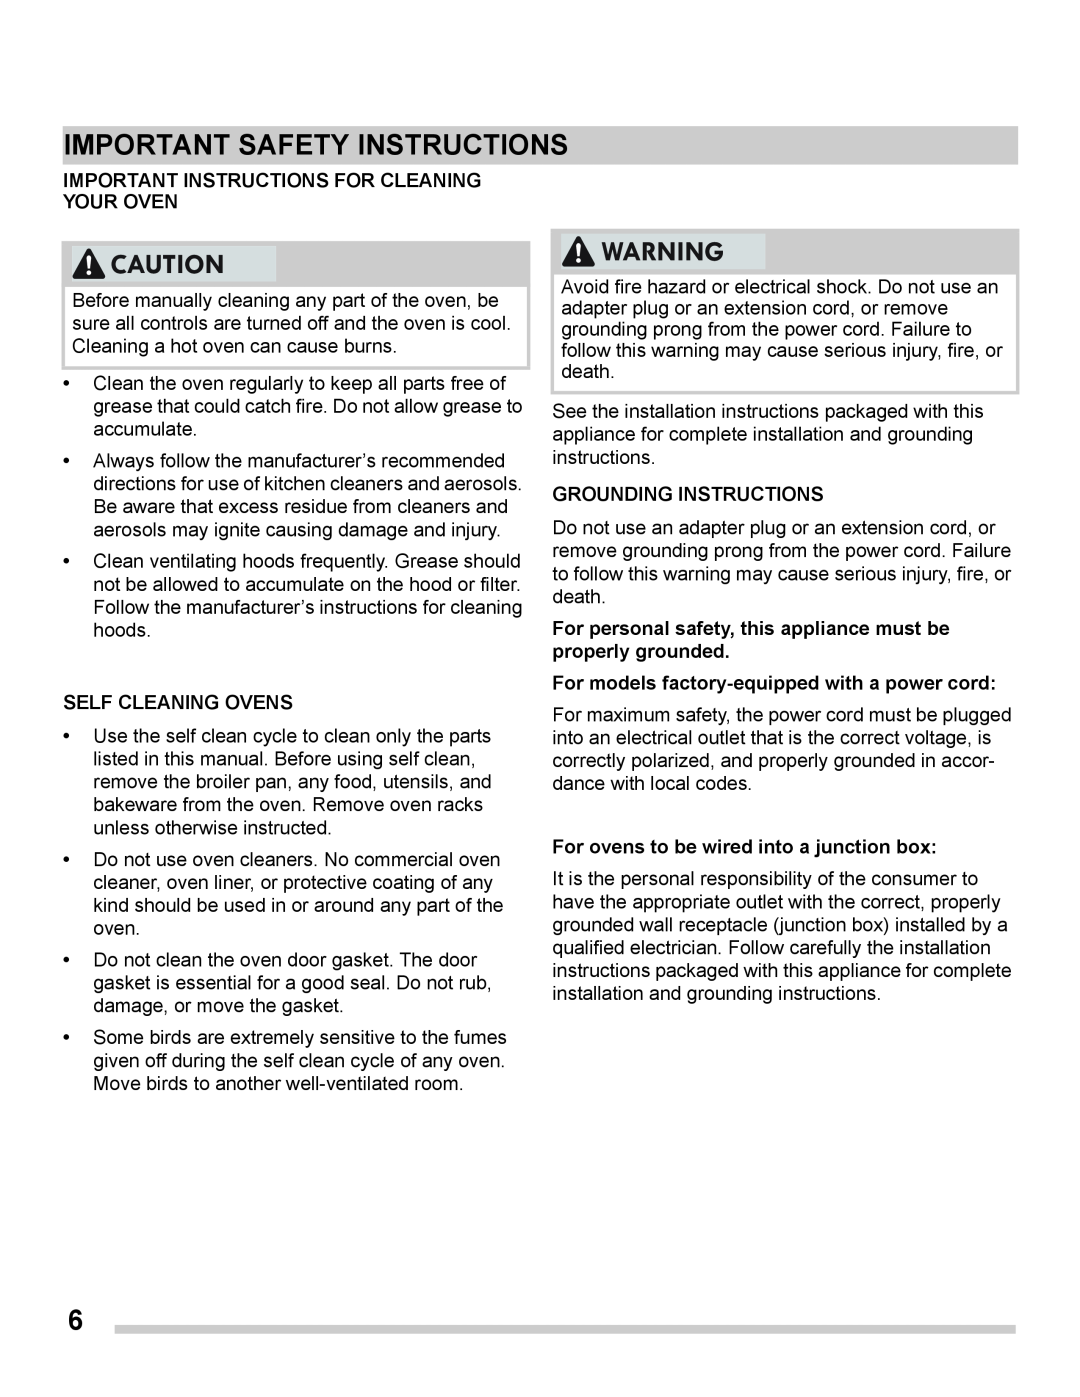 Frigidaire FGET3065PF Important Instructions For Cleaning Your Oven, Self Cleaning Ovens, Grounding Instructions 